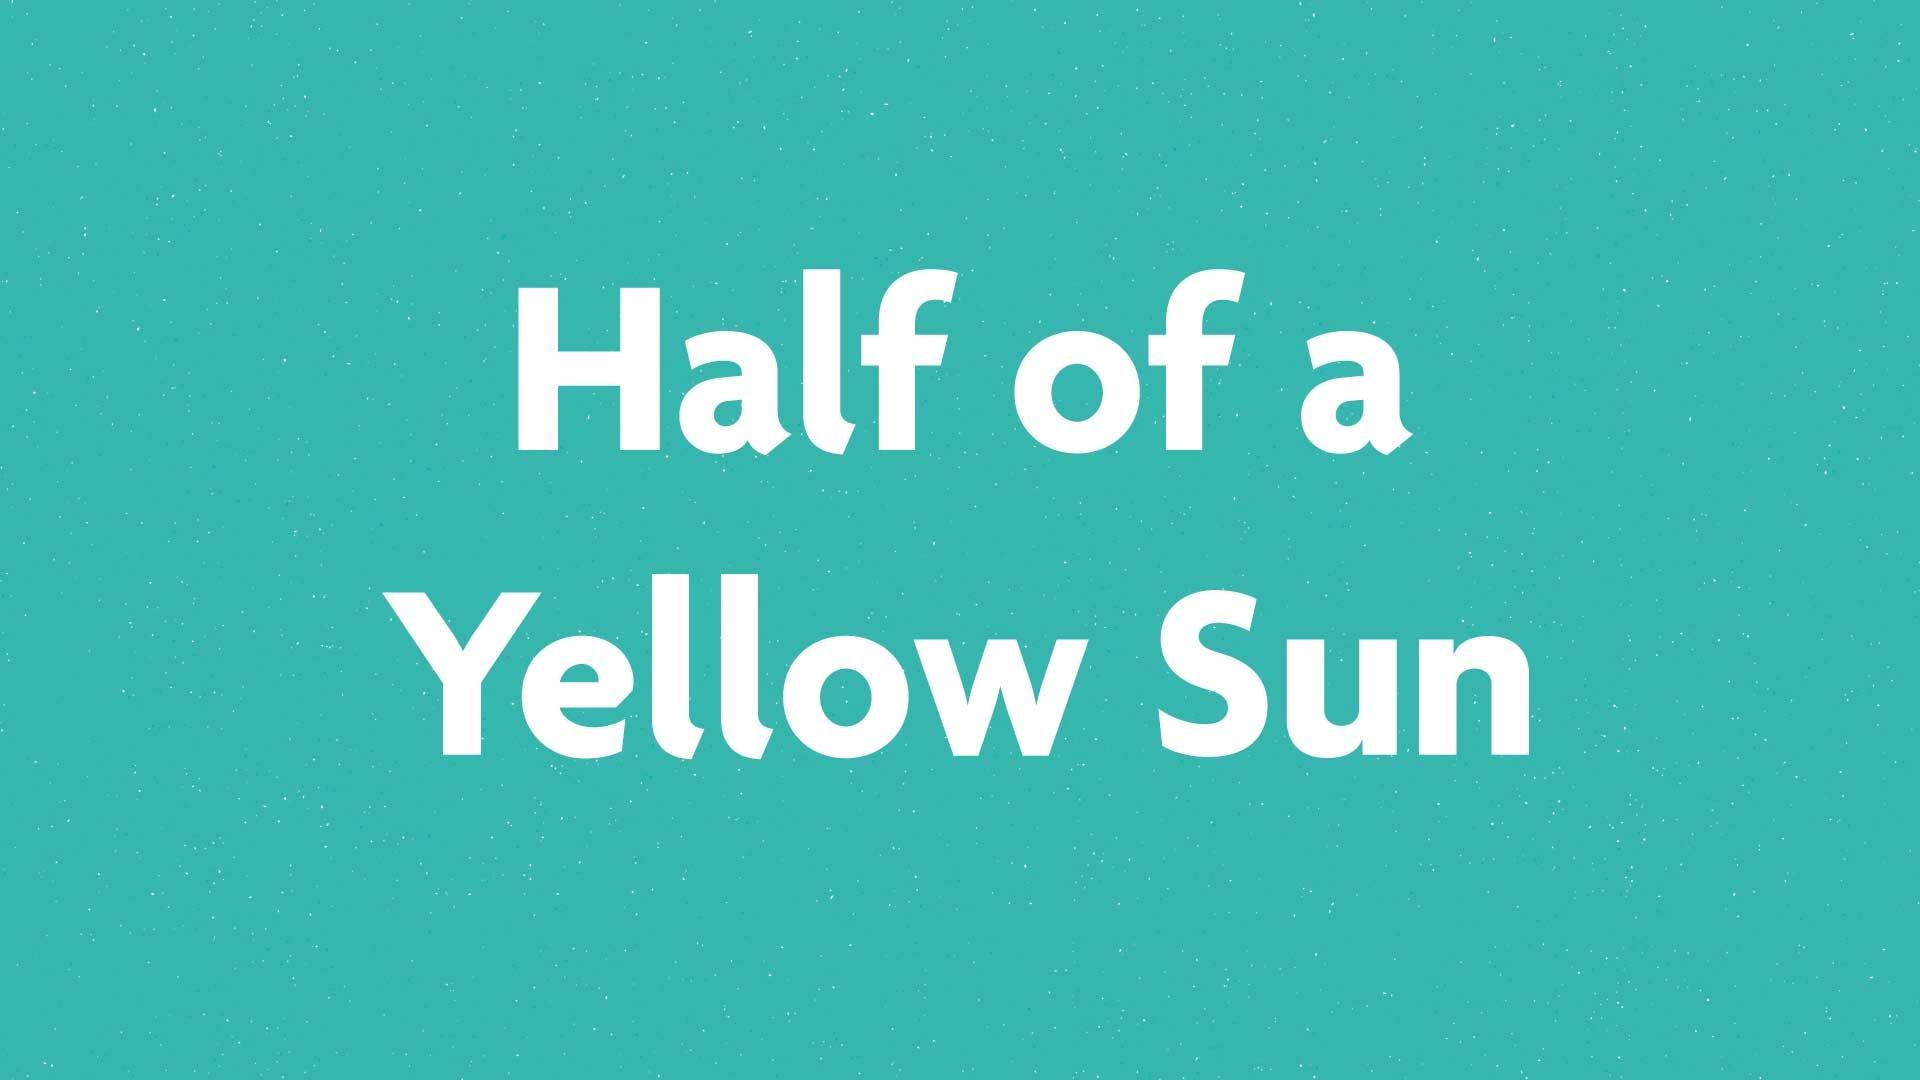 Half of a Yellow Sun book submission card on a green background.